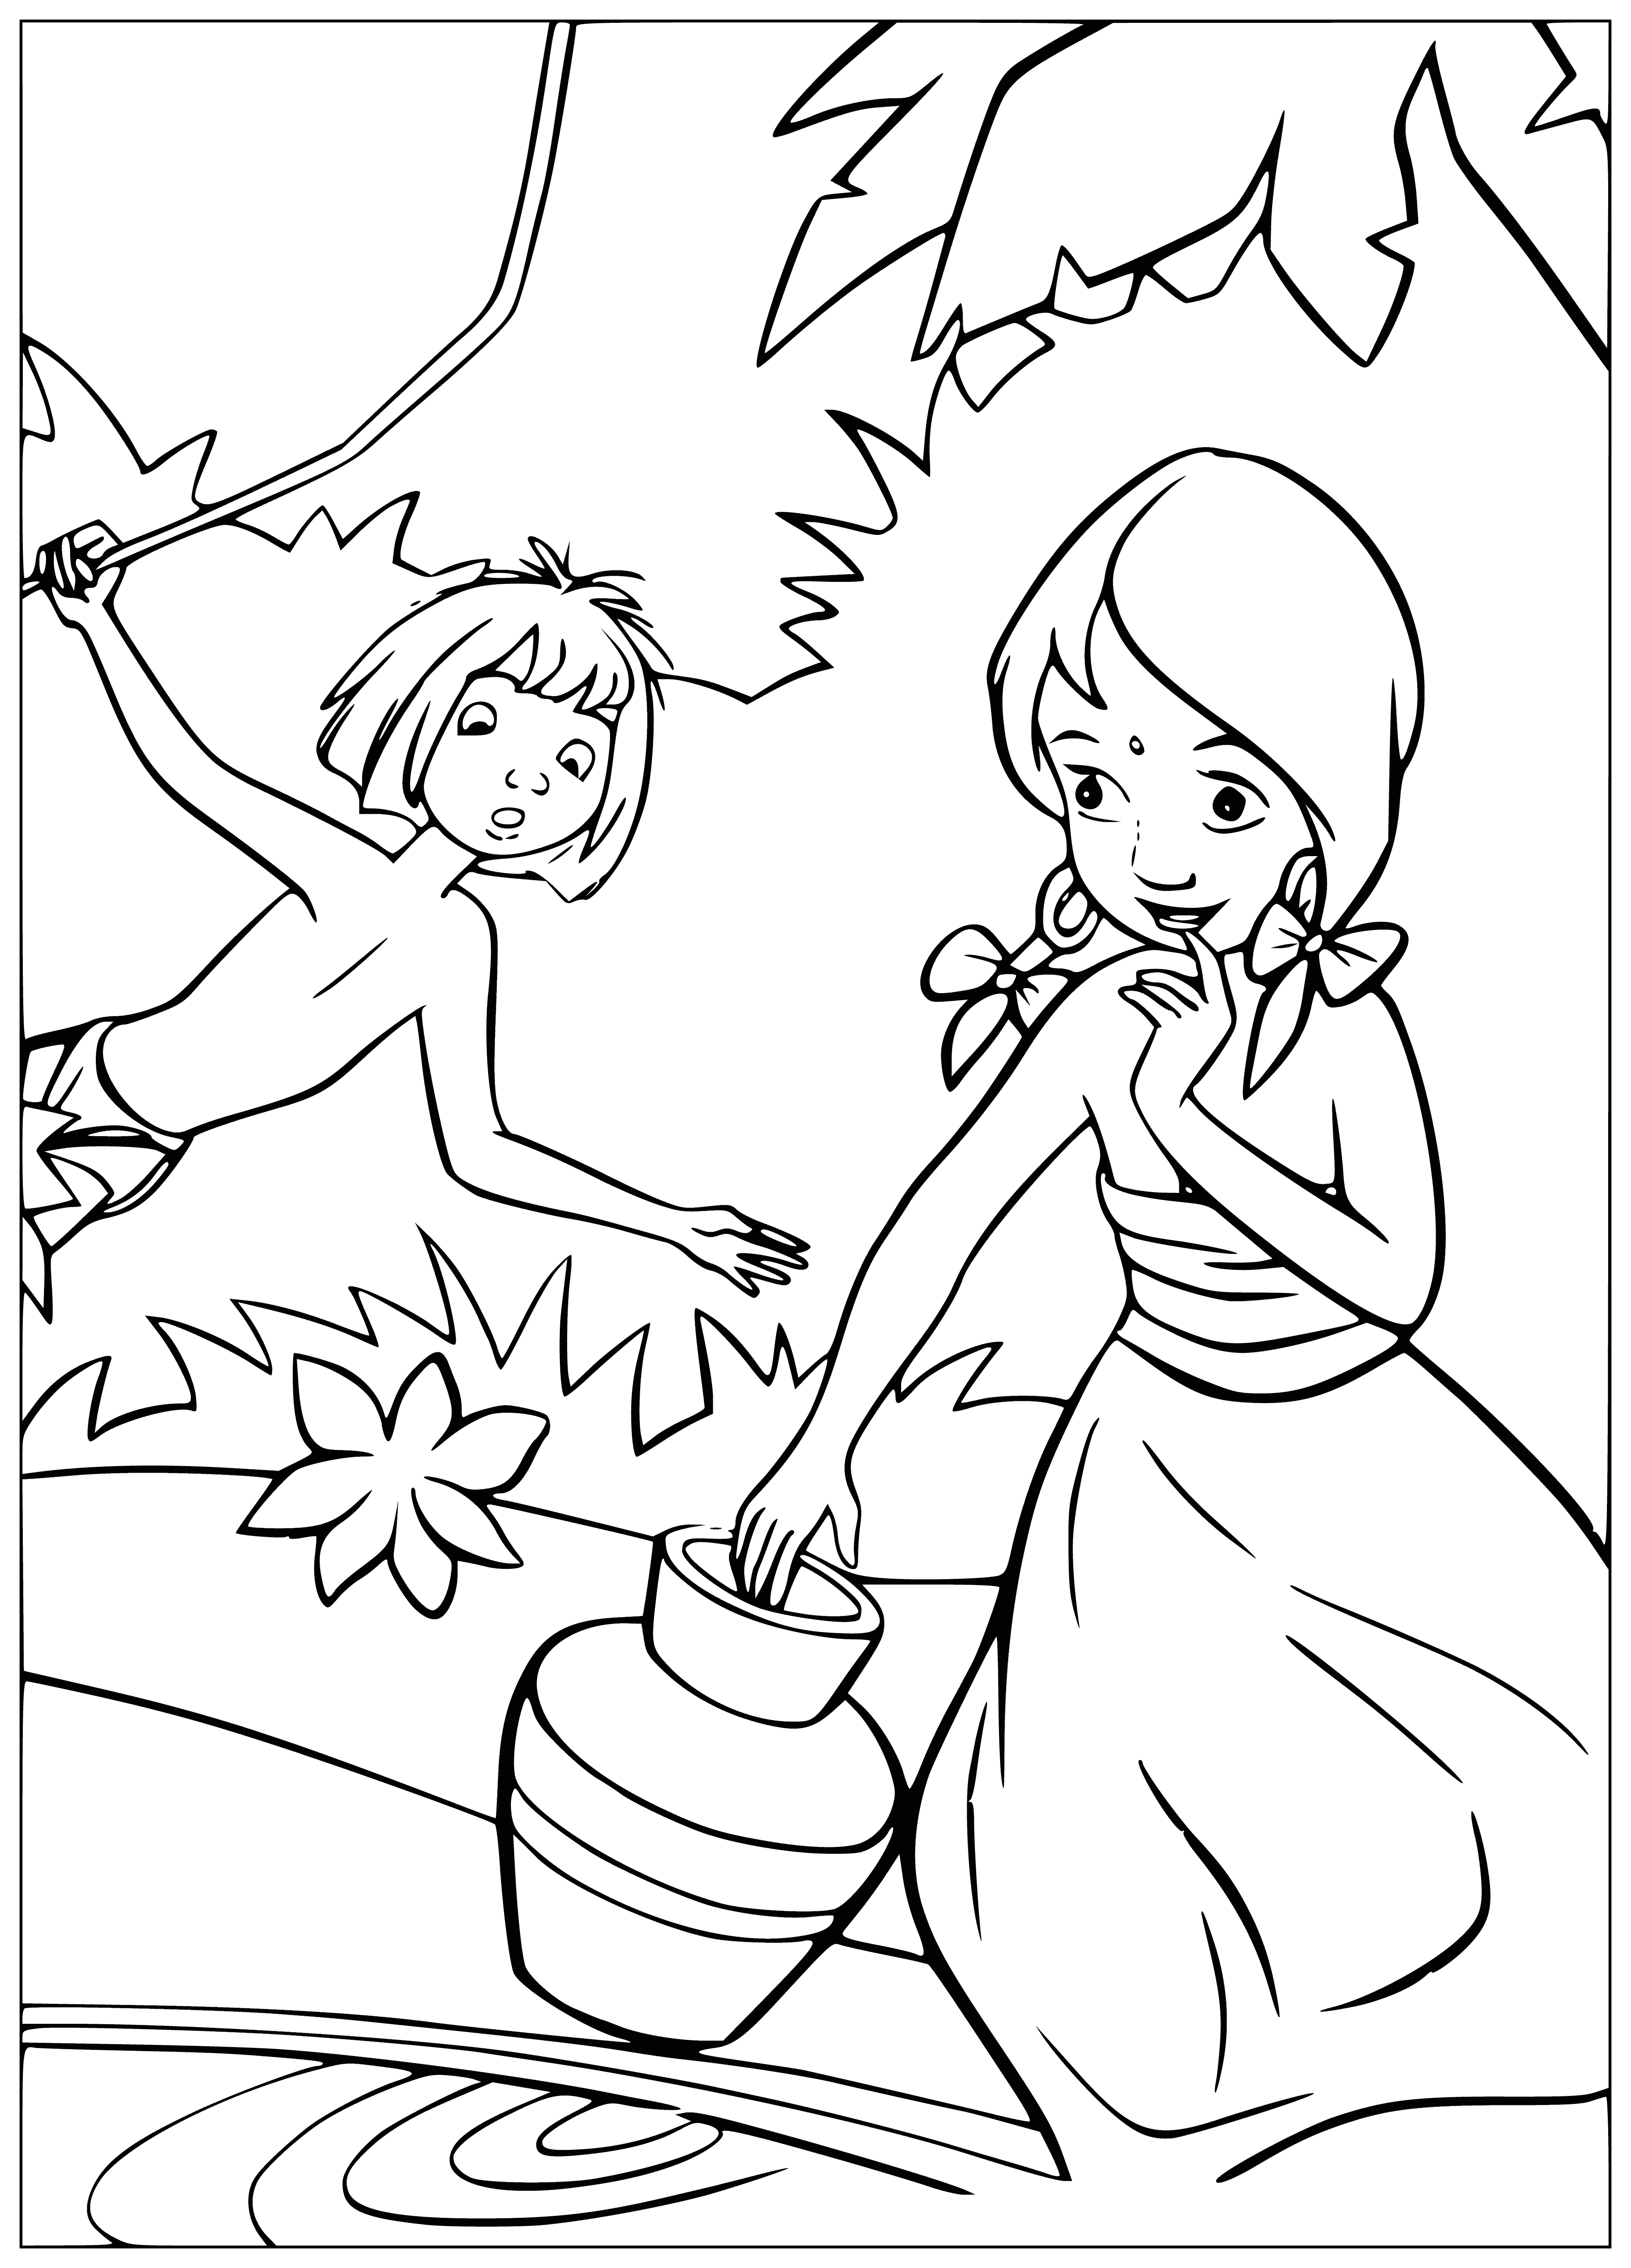 coloring page: Mowgli and a girl in a white dress meet in the jungle, her expression of surprise echoes Mowgli's knife.